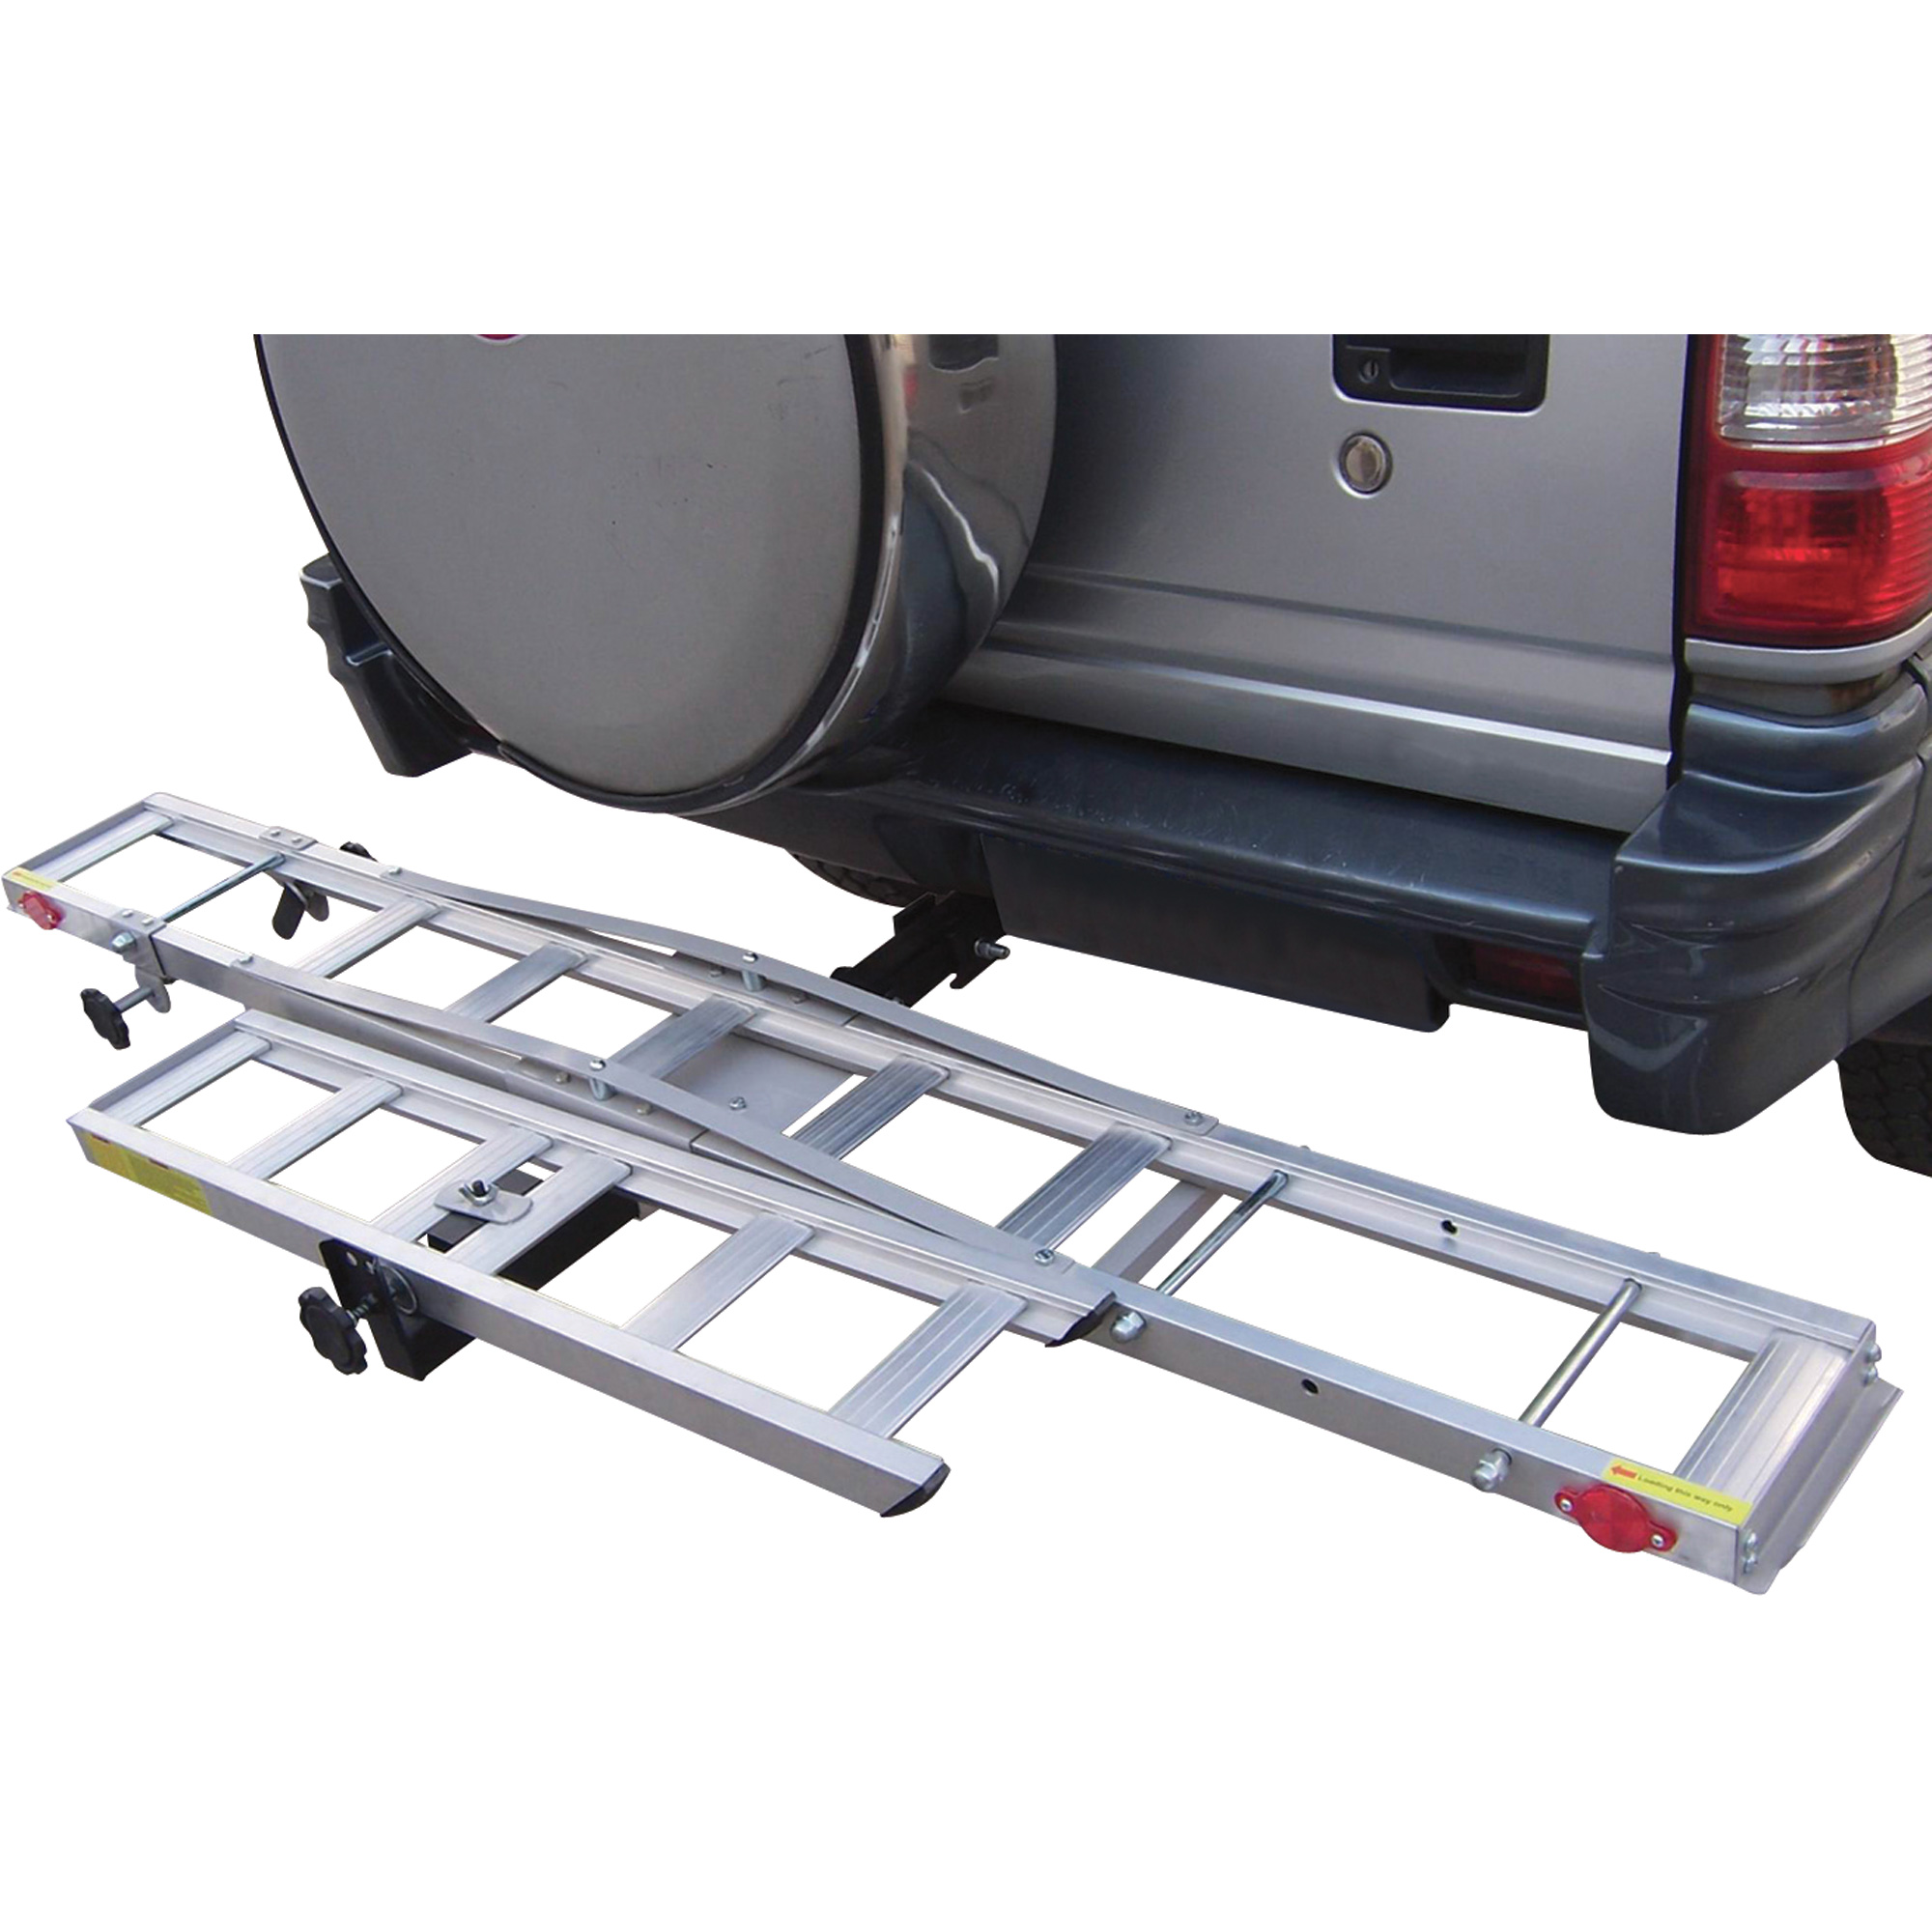 Trailer hitch rack for motorcycle